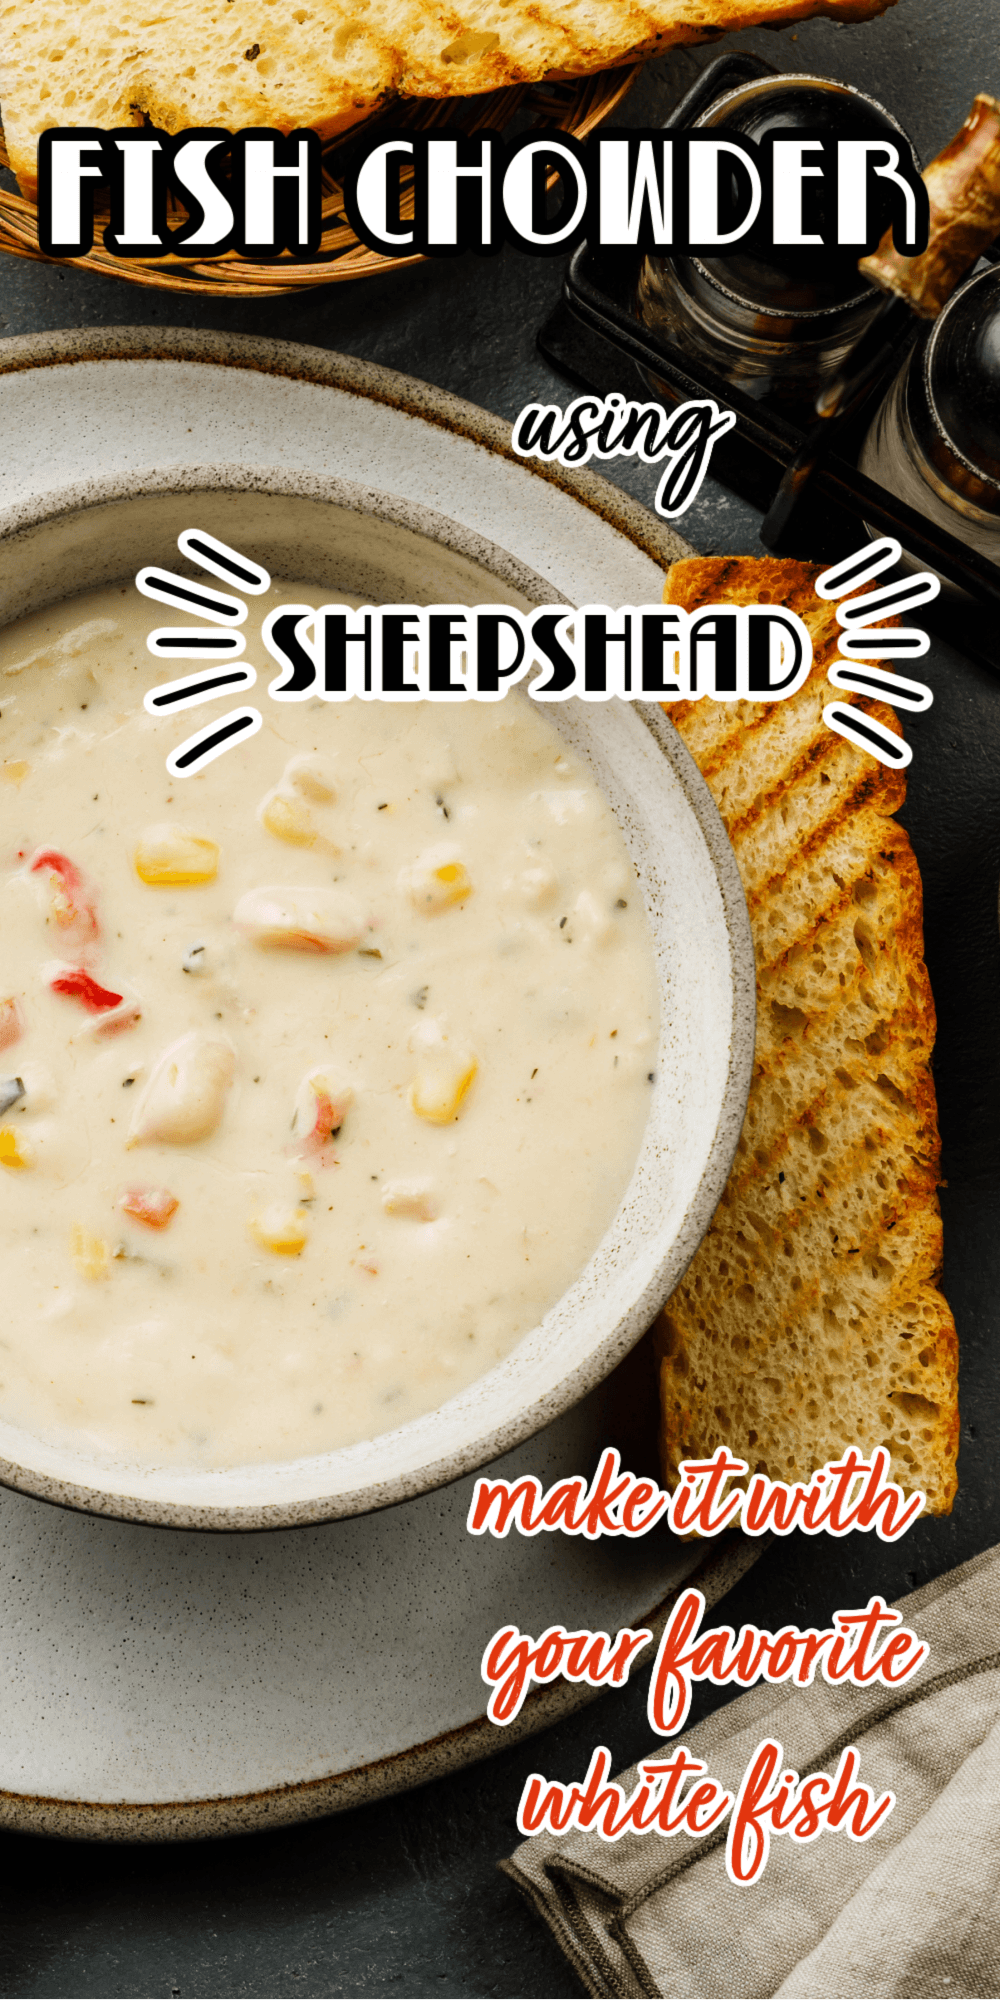 A seafood chowder that's easy to make and so creamy and tasty you'll think you're sipping on rich clam chowder. Spicy and hearty the fish chowder is one of our family's favorite. Have the fish soup for lunch in a large cup or a big bowl for dinner. You can make this ahead and it is so tasty that you'll want to serve it for company. #sheepsheadrecipe #fishchowder, #fishsoup #seafoodchowder